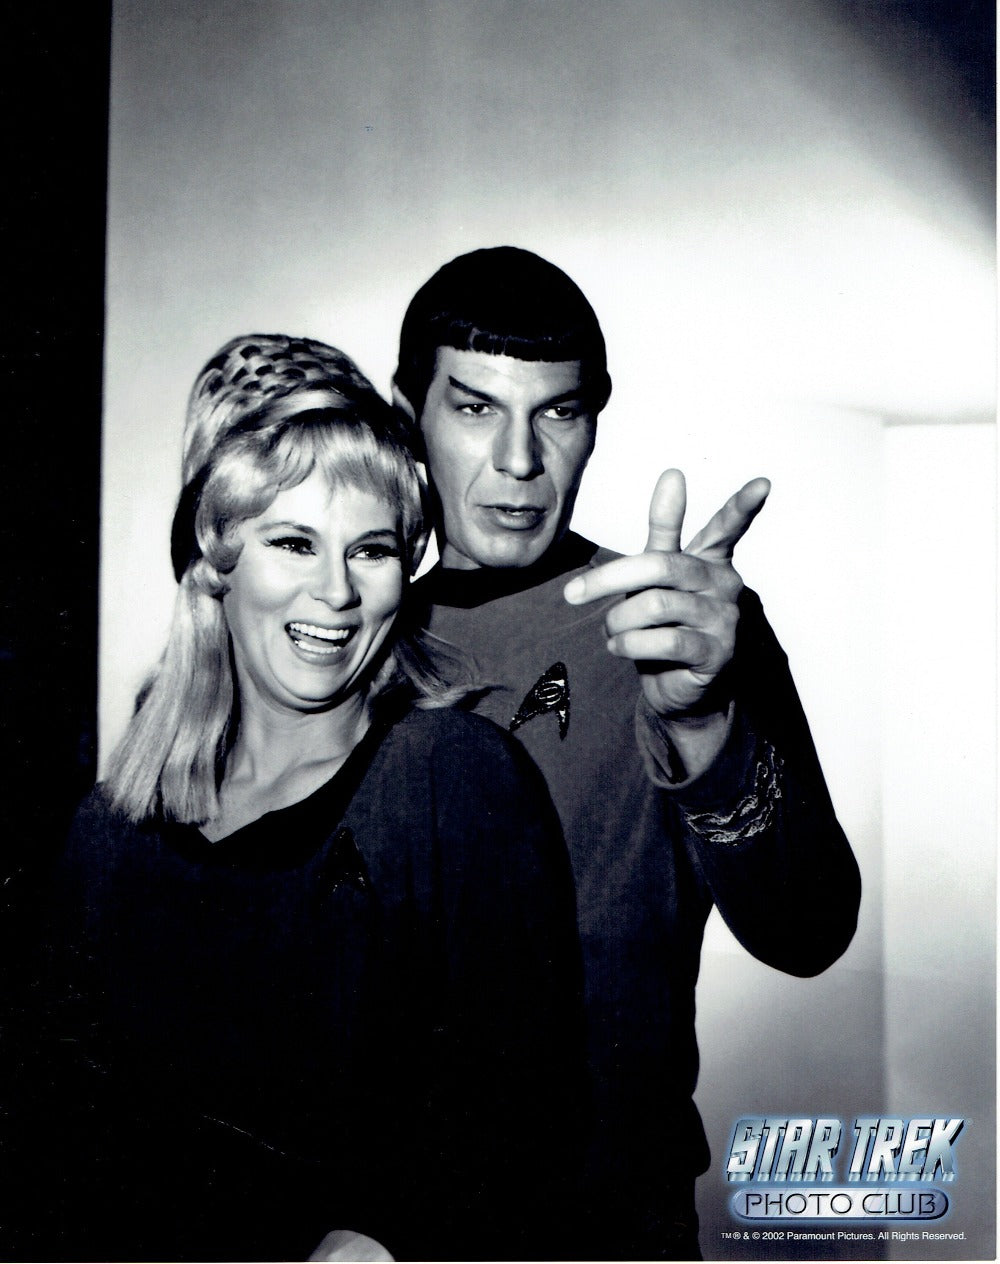 Star Trek Glossy Photos from Leonard Nimoy's Personal Collection